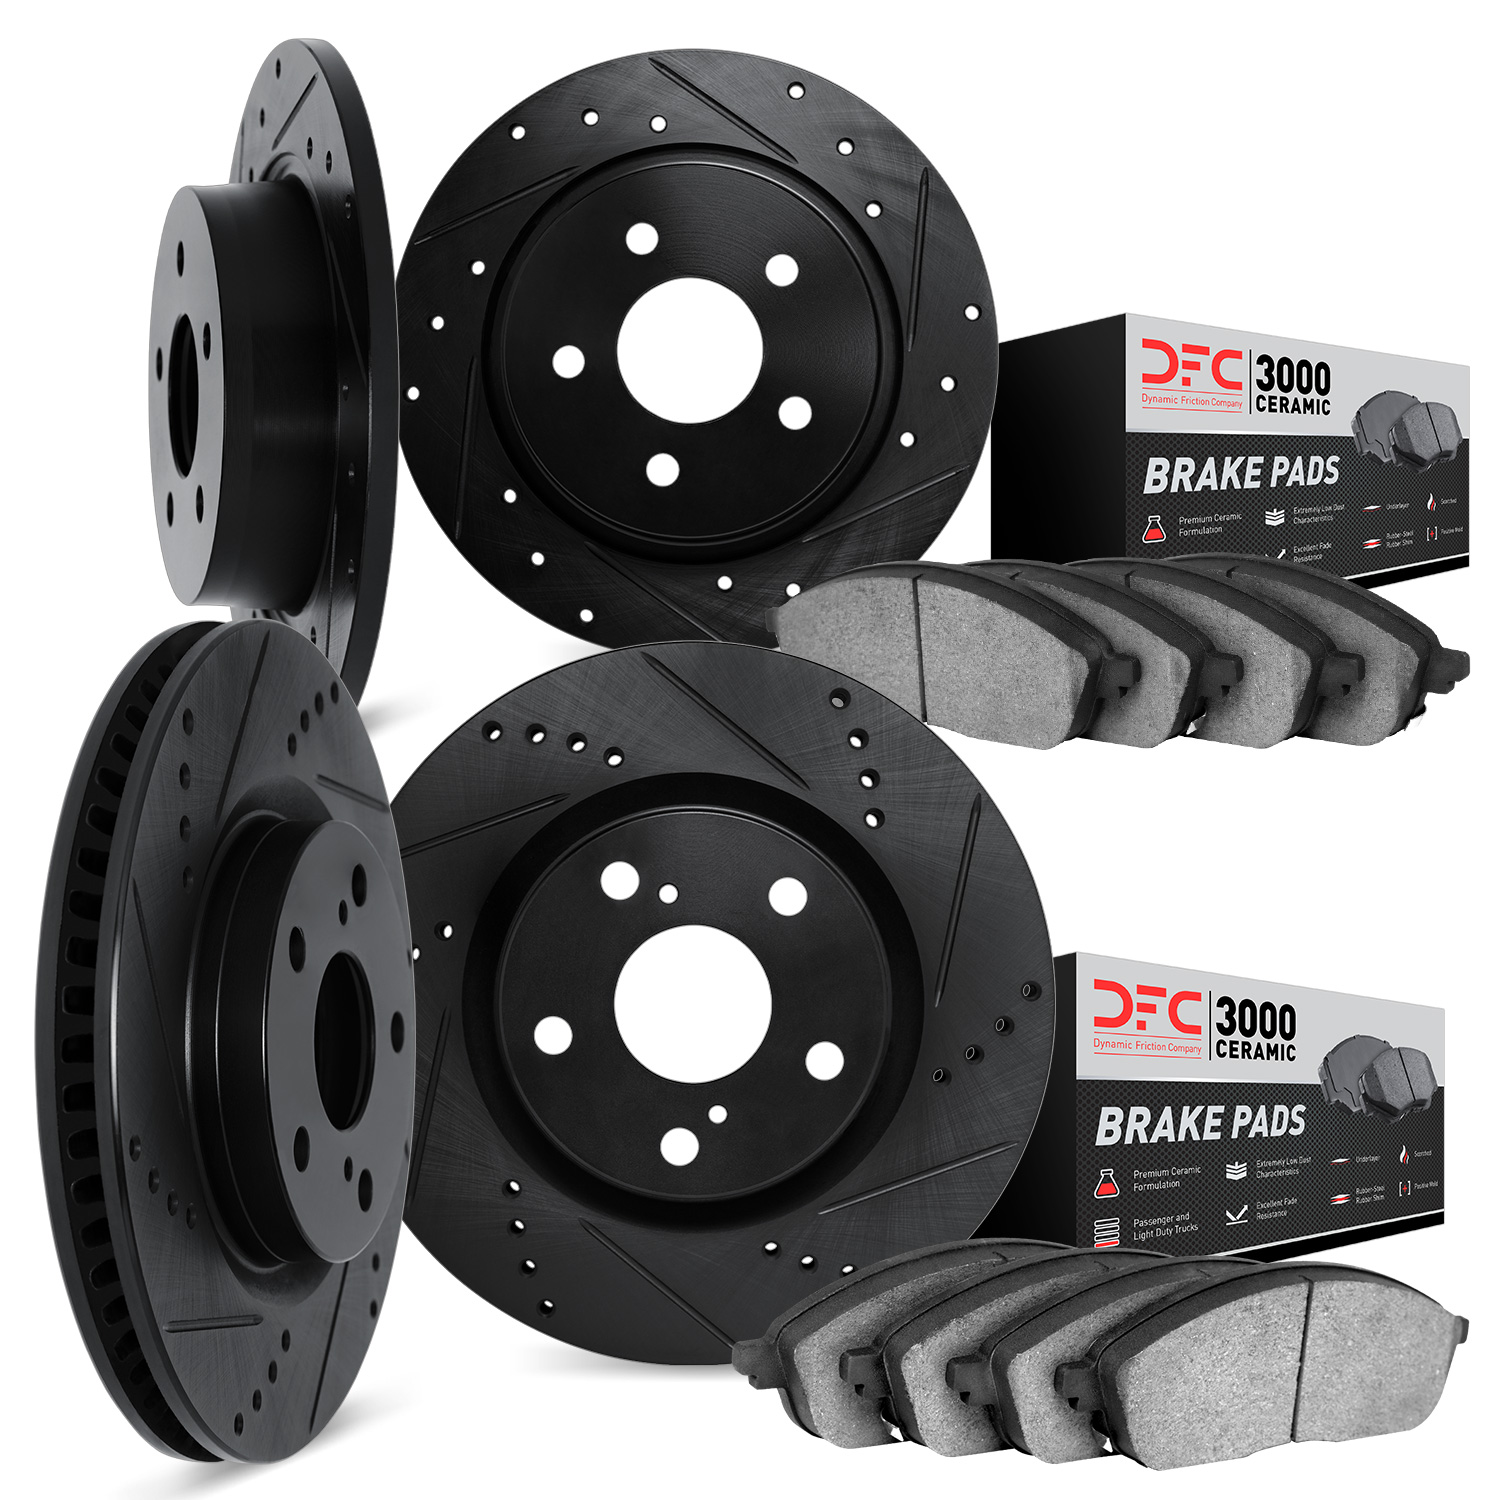 8304-42004 Drilled/Slotted Brake Rotors with 3000-Series Ceramic Brake Pads Kit [Black], 1999-2002 Mopar, Position: Front and Re